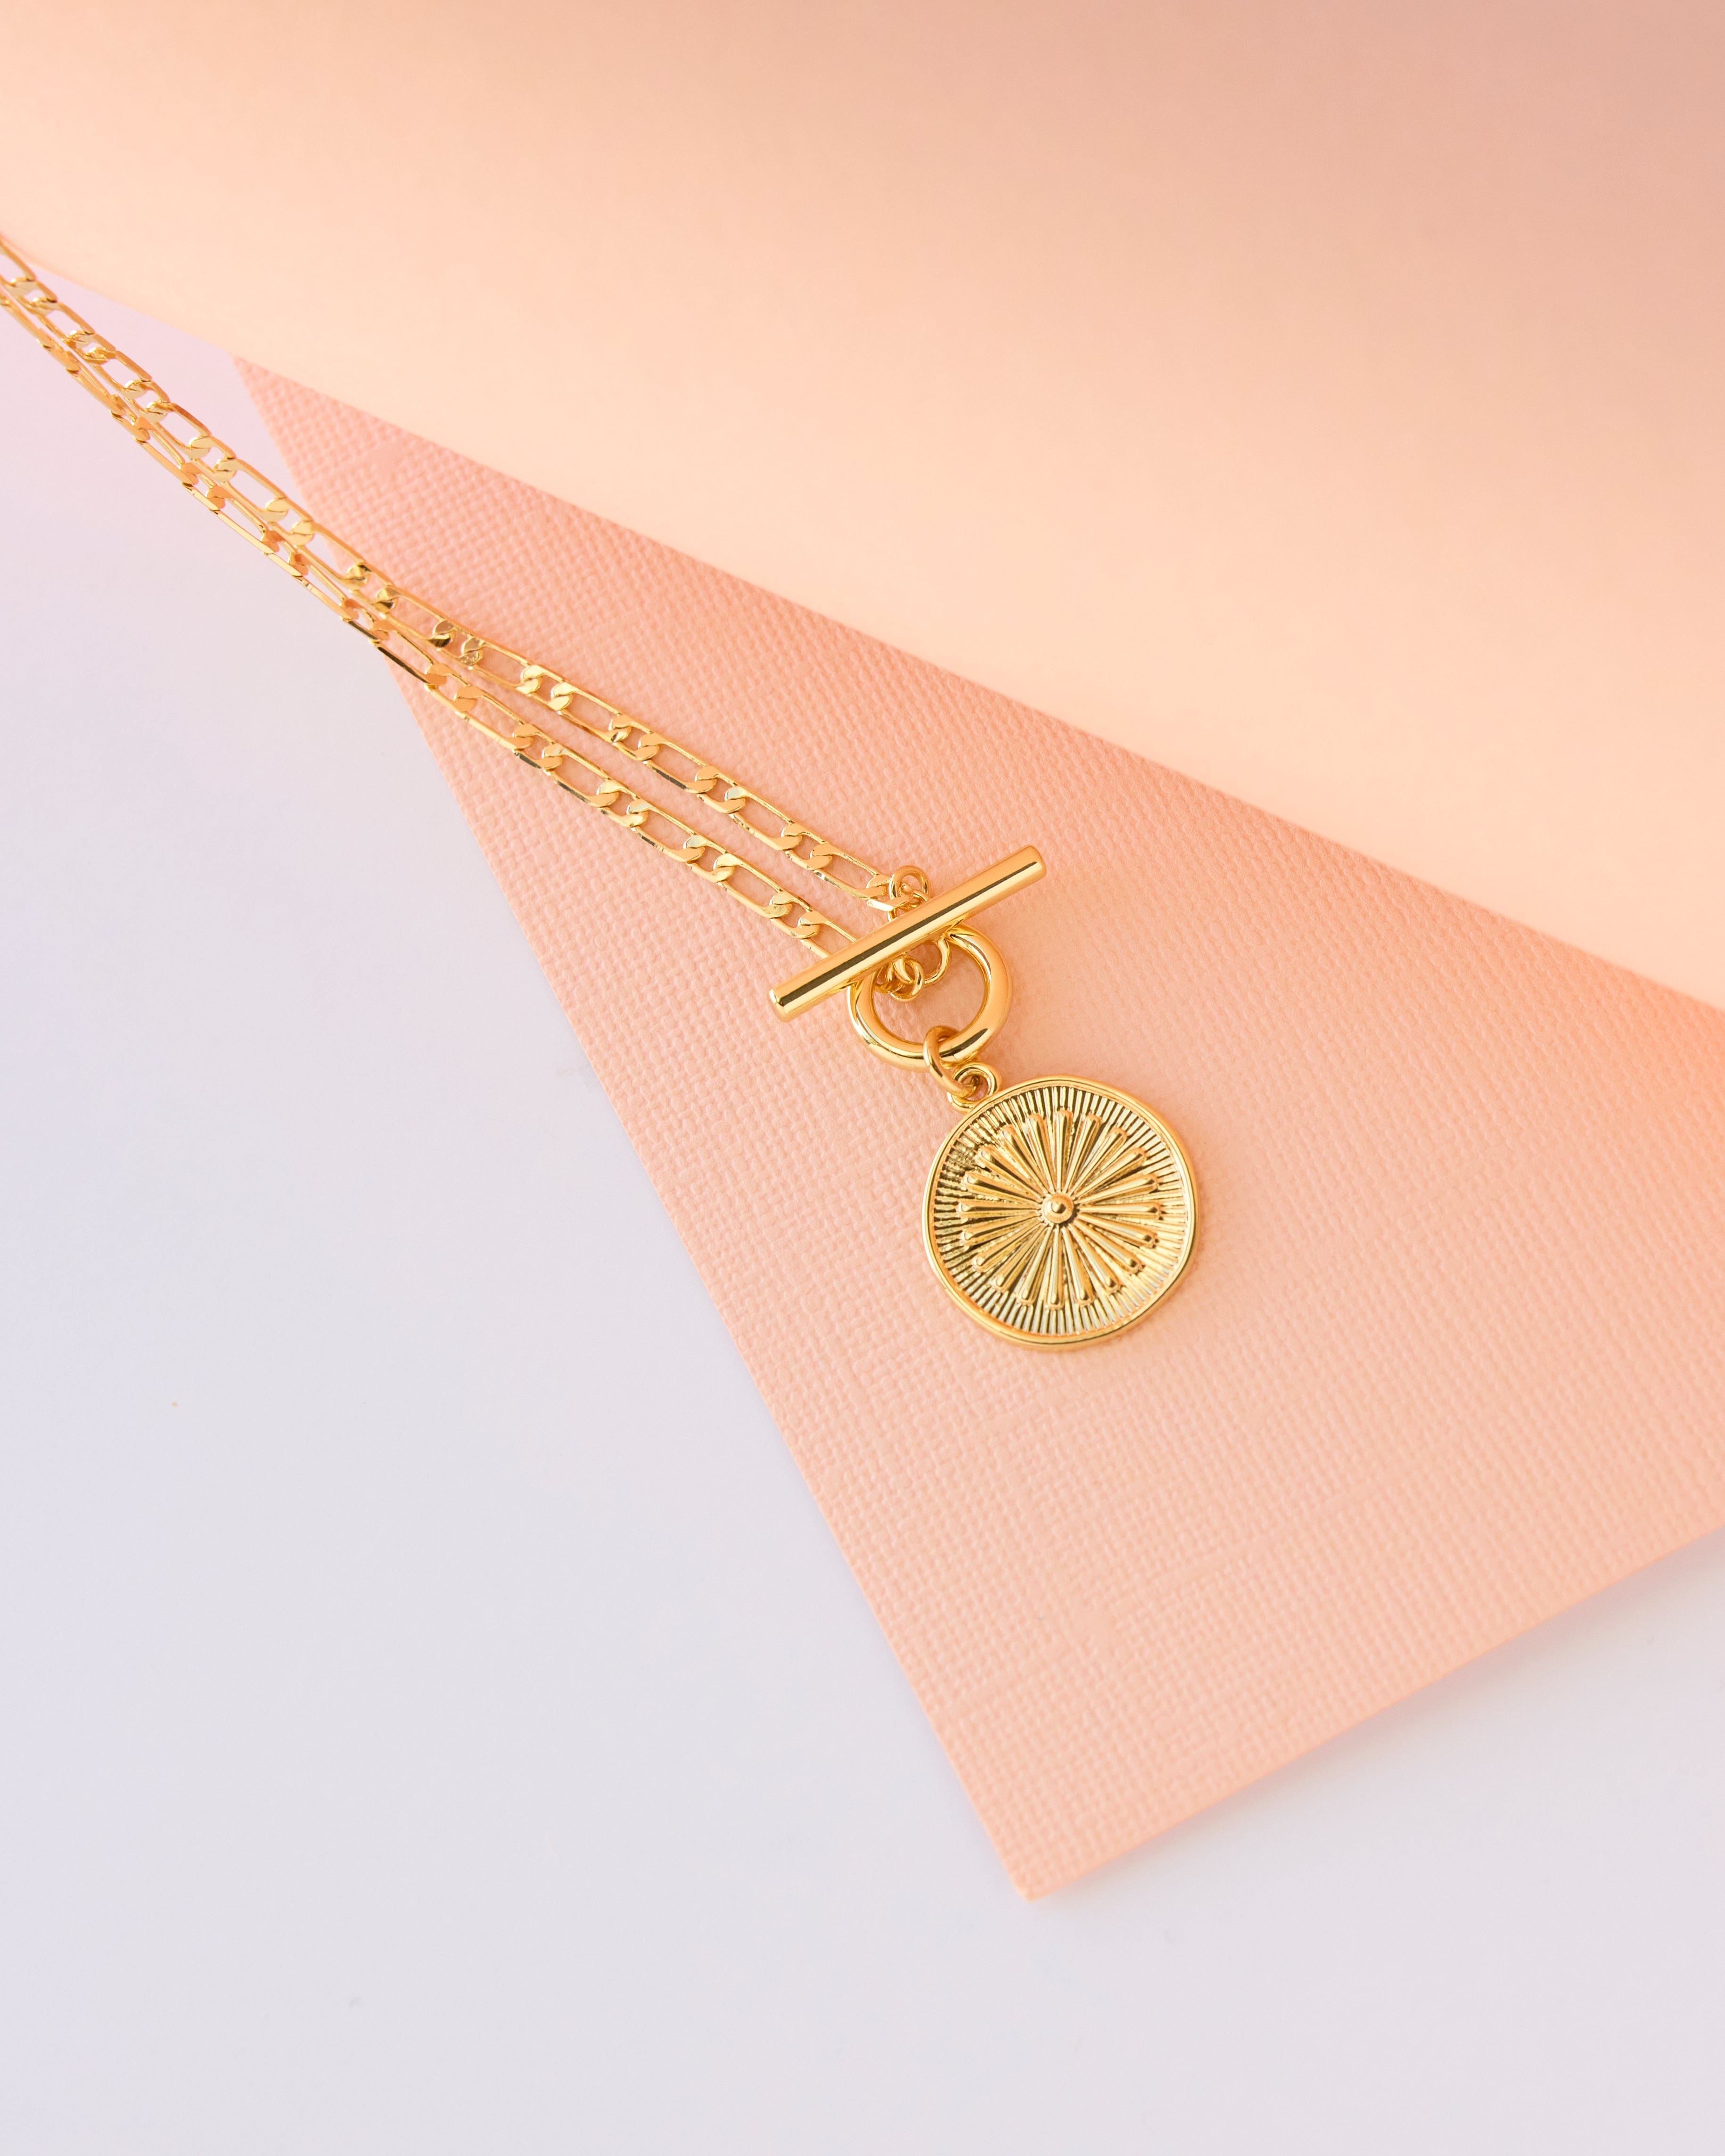 Gold necklace with flower charm.